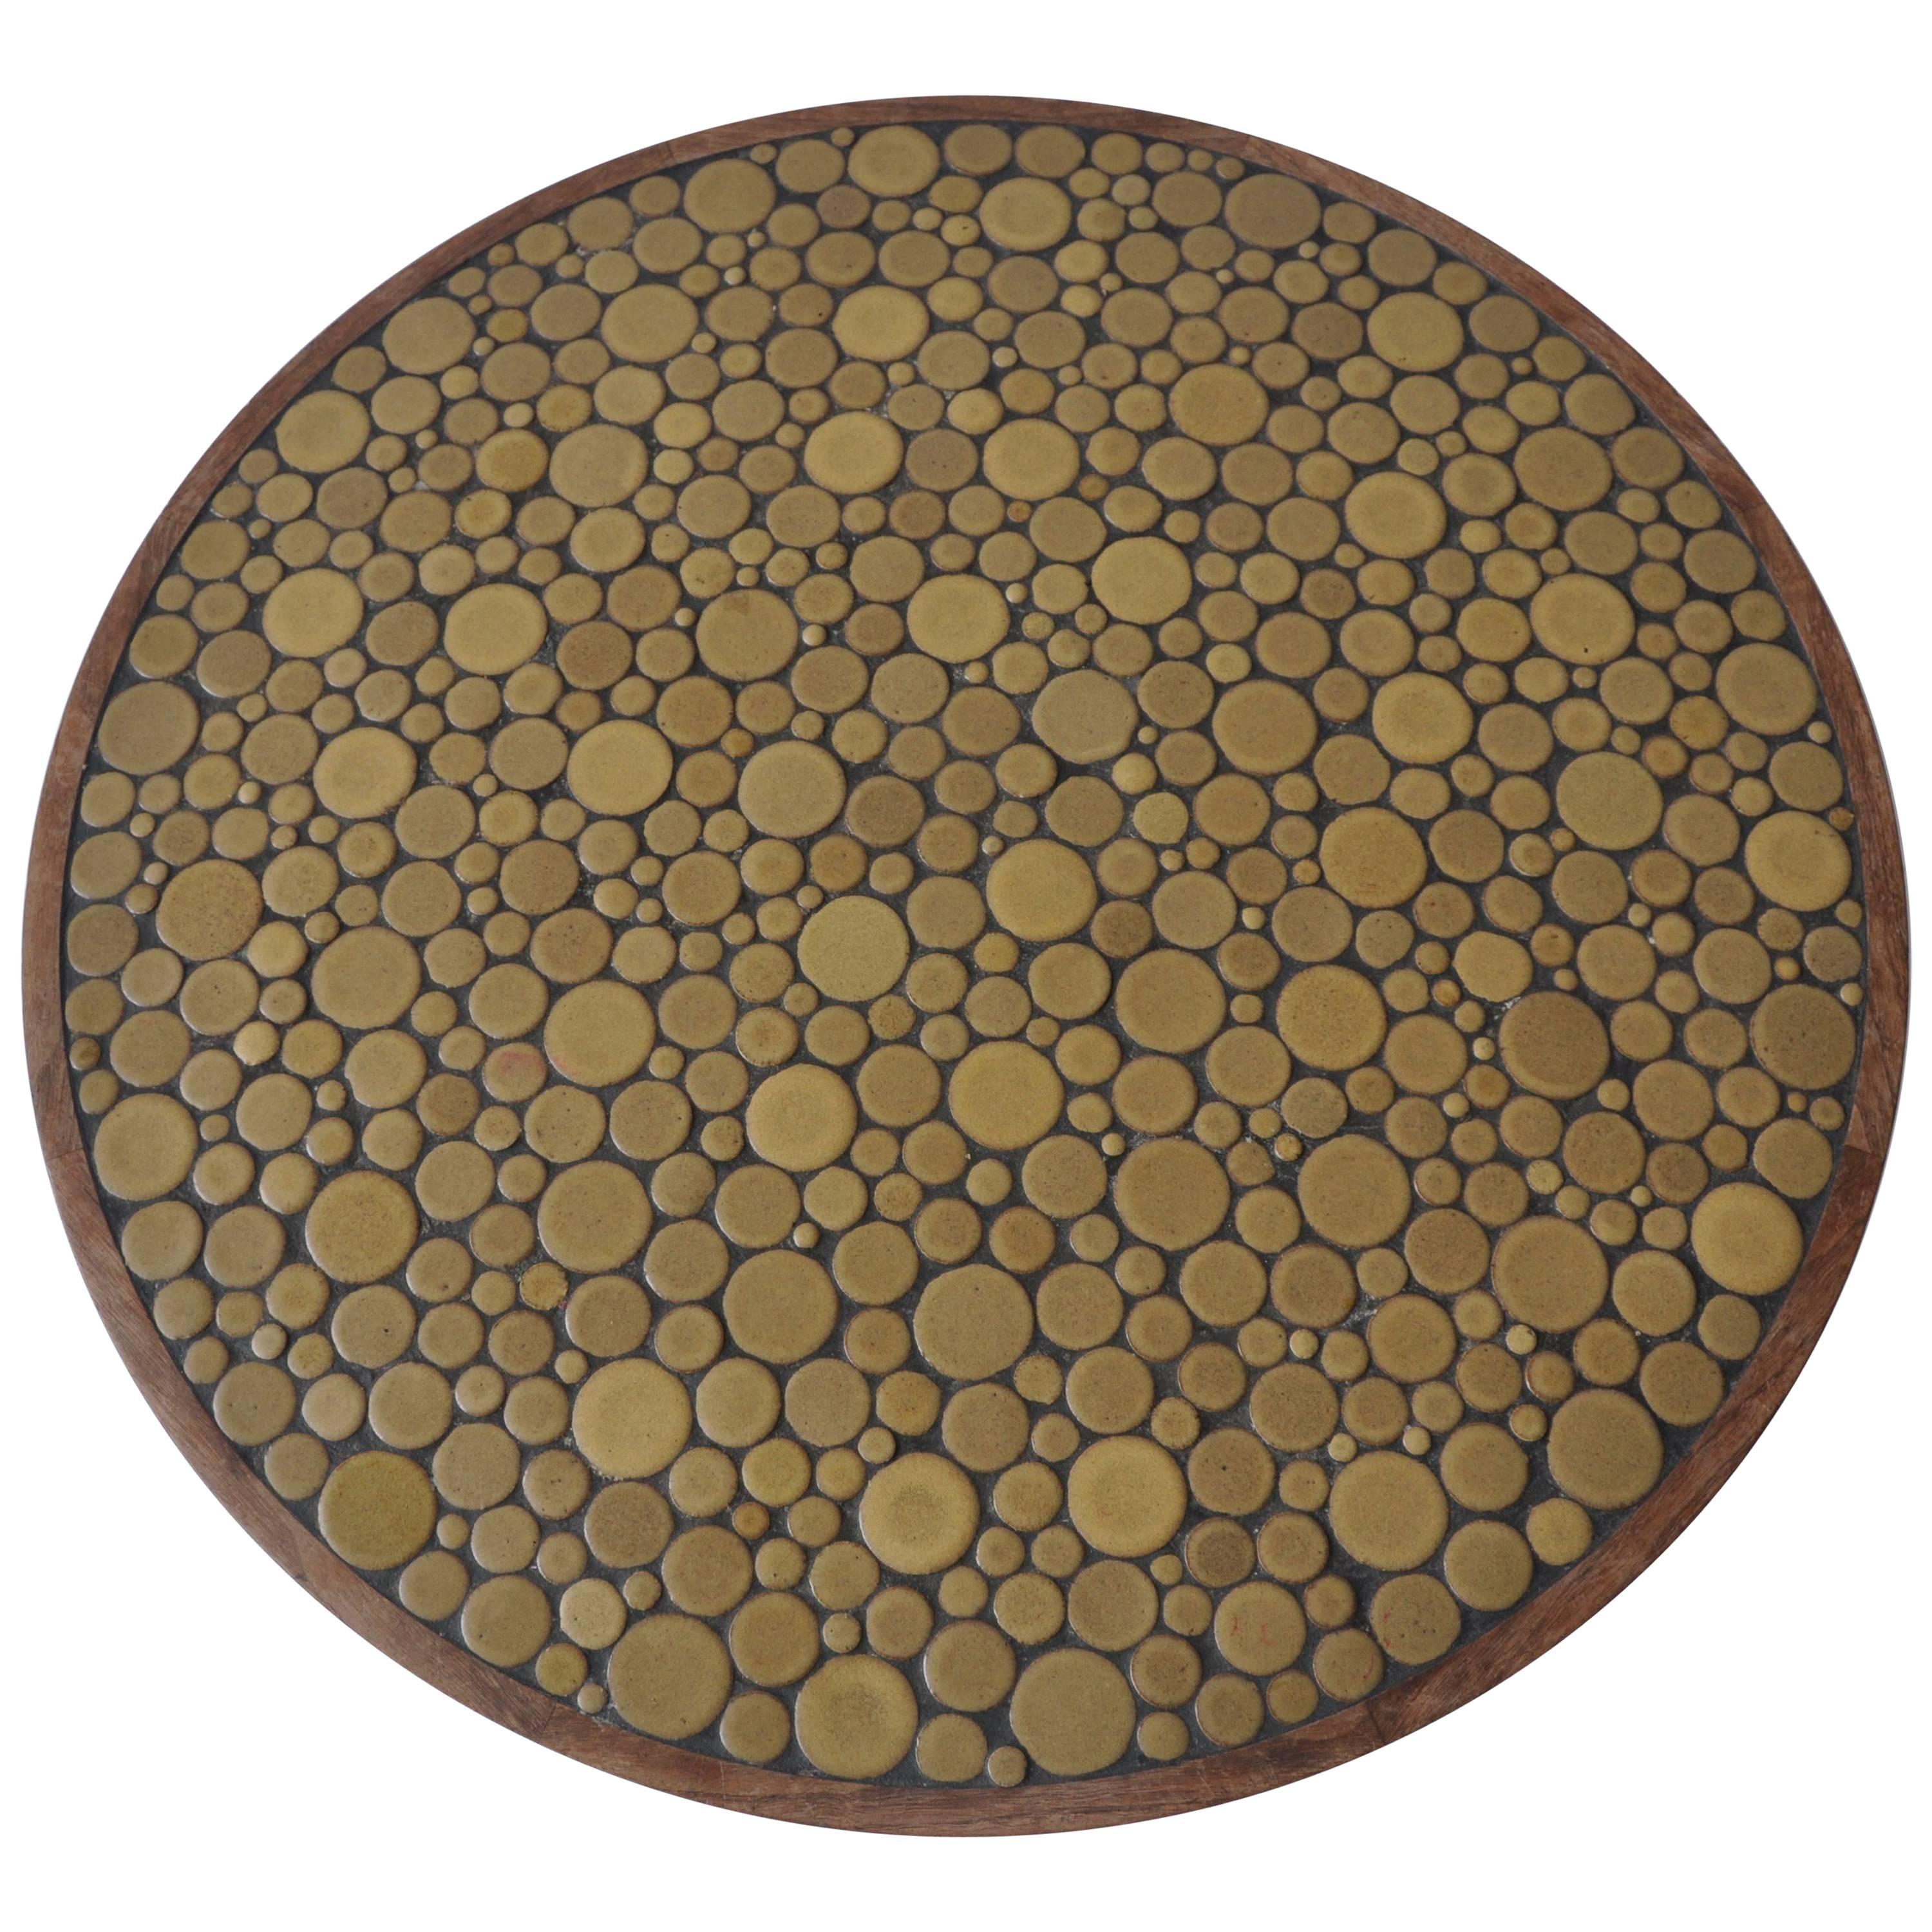 Ceramic Tile-Top Coffee Table by Gordon and Jane Martz